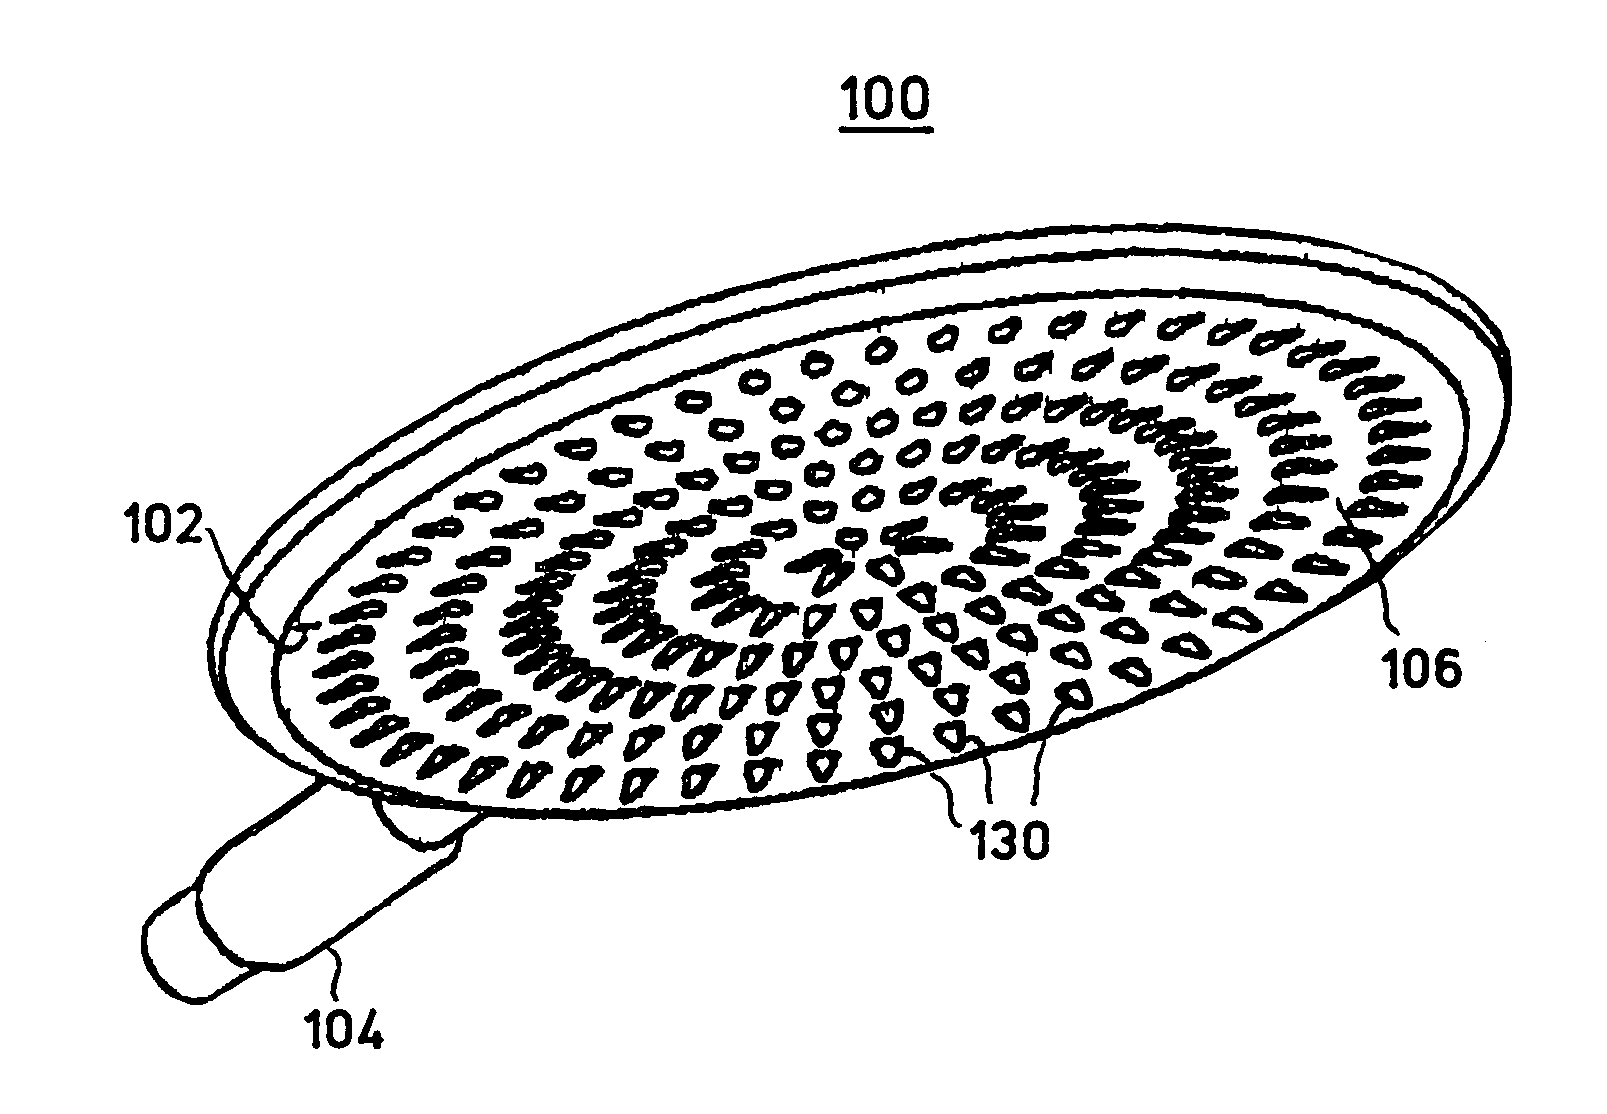 Showerhead with grooved water release ducts